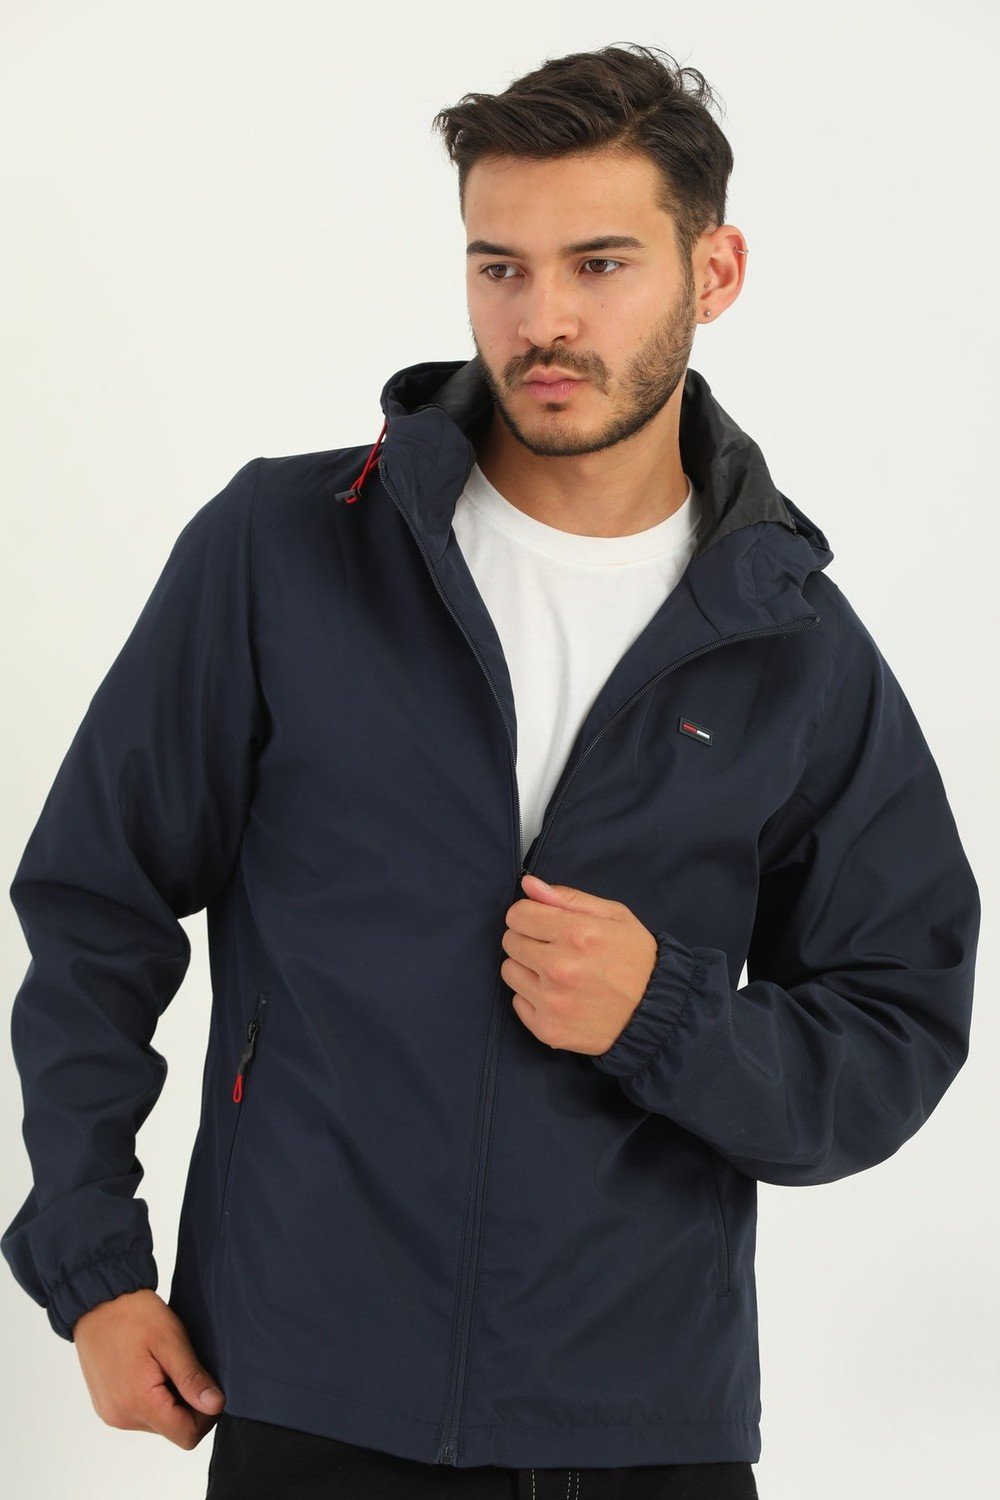 D1fference Men's Navy Blue Inner Lined Water And Windproof Hooded Sports Raincoat With Pocket.